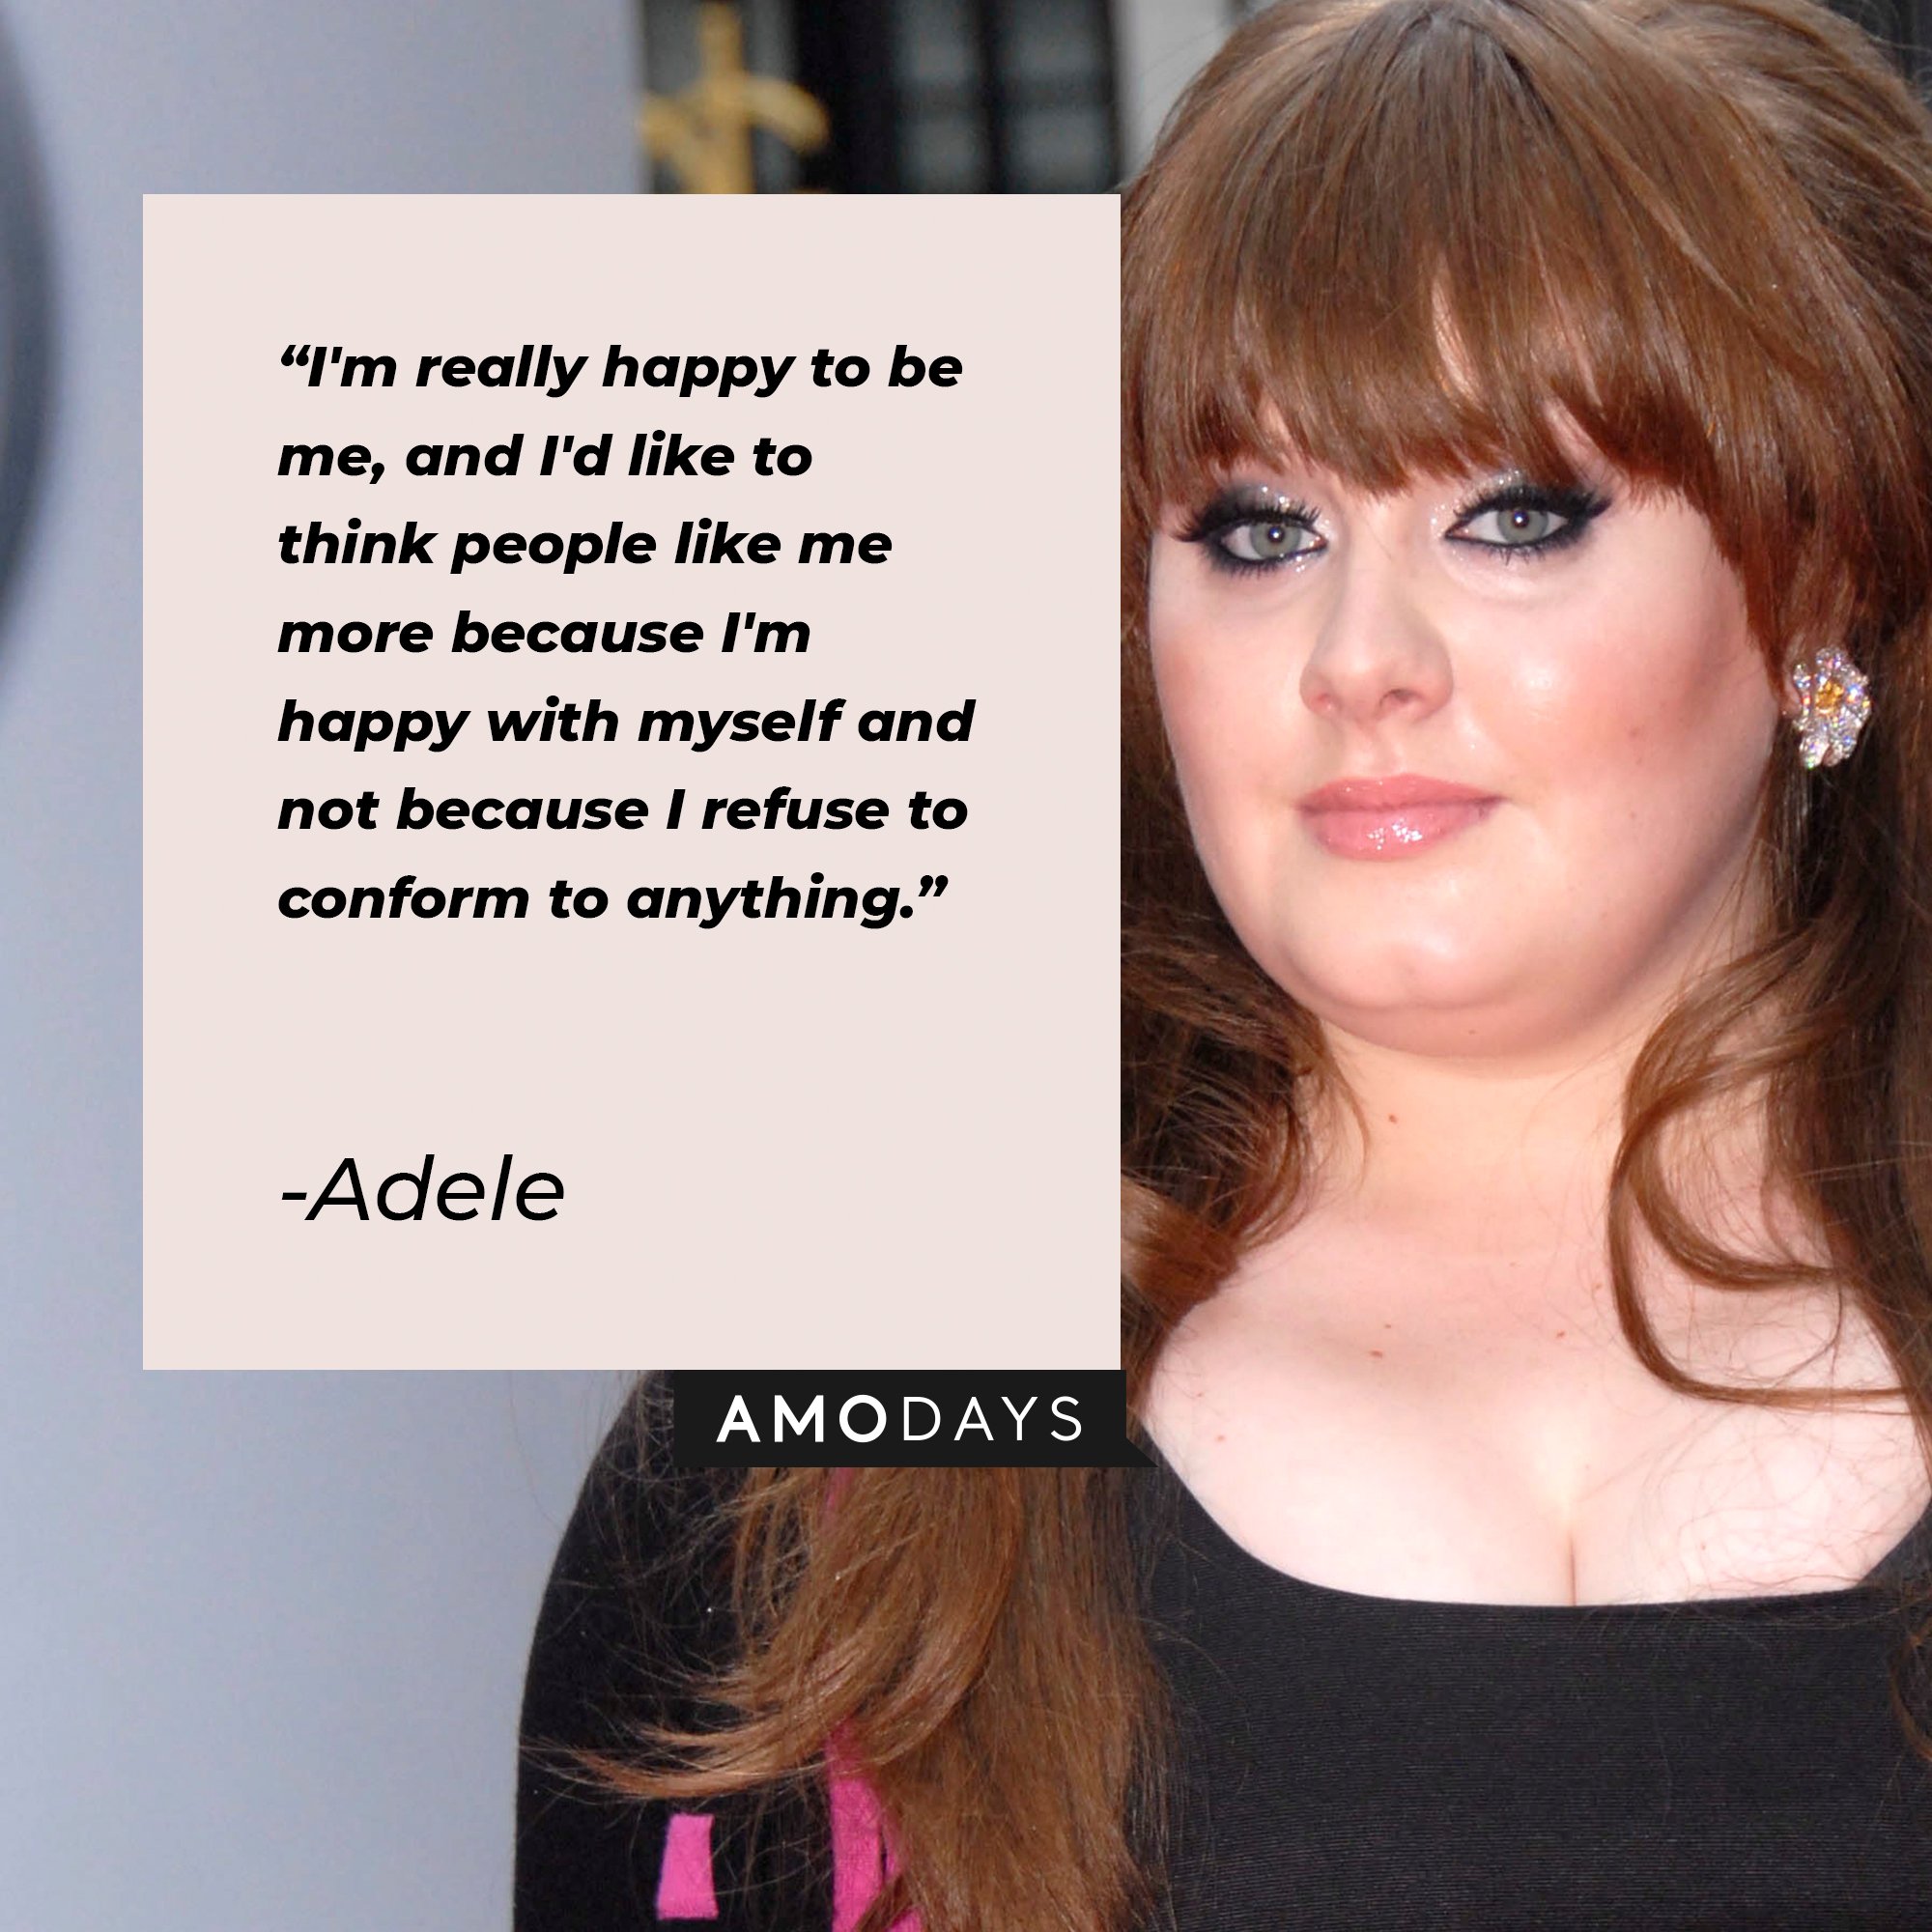 Adele’s quote: "I'm really happy to be me, and I'd like to think people like me more because I'm happy with myself and not because I refuse to conform to anything." | Image: AmoDays